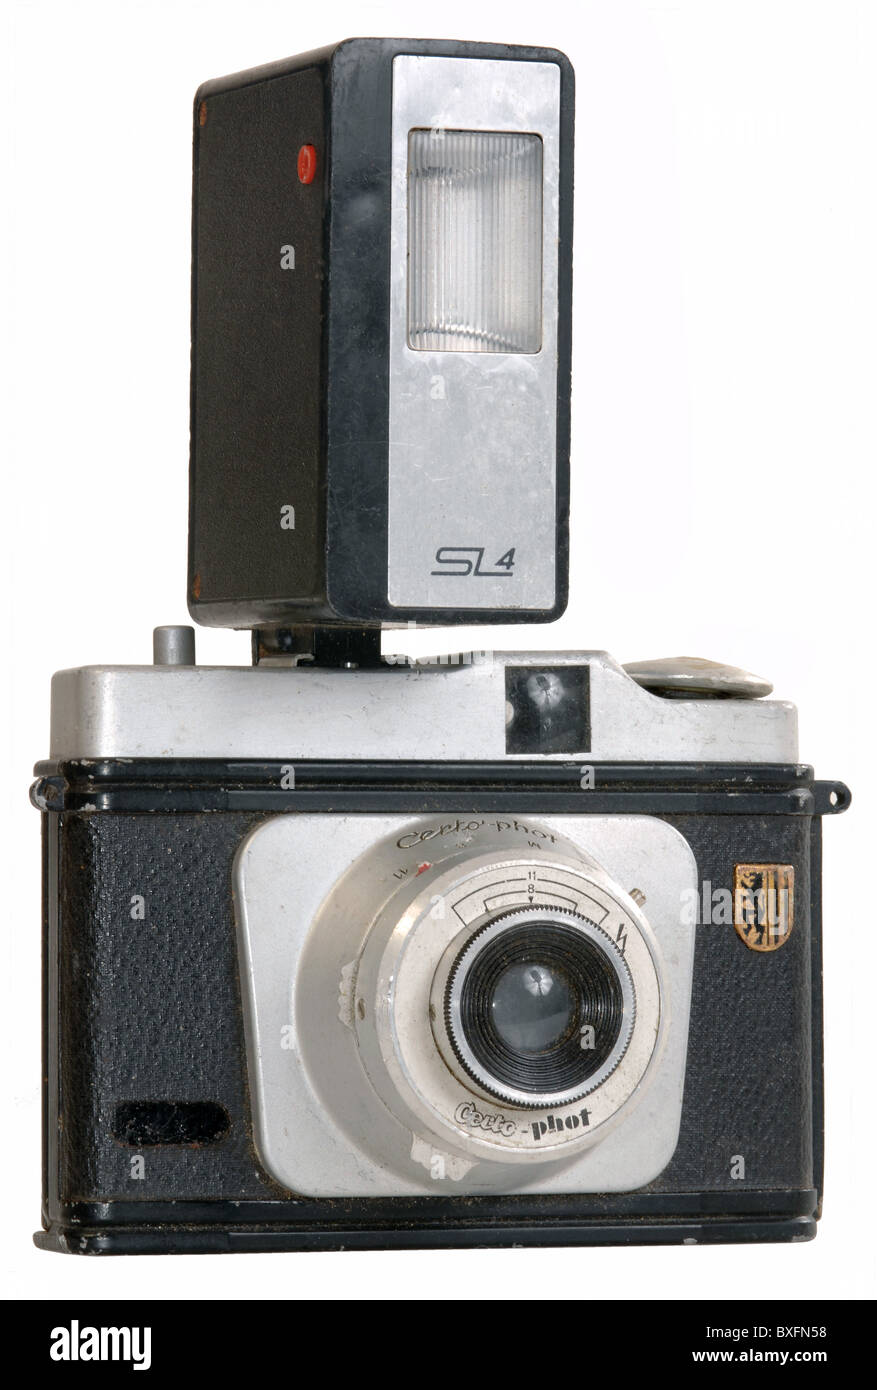 photography, cameras, roll film camera, Certo-phot, made by Certo Kamerawerk, Dresden, East-Germany, 1958, Additional-Rights-Clearences-Not Available Stock Photo